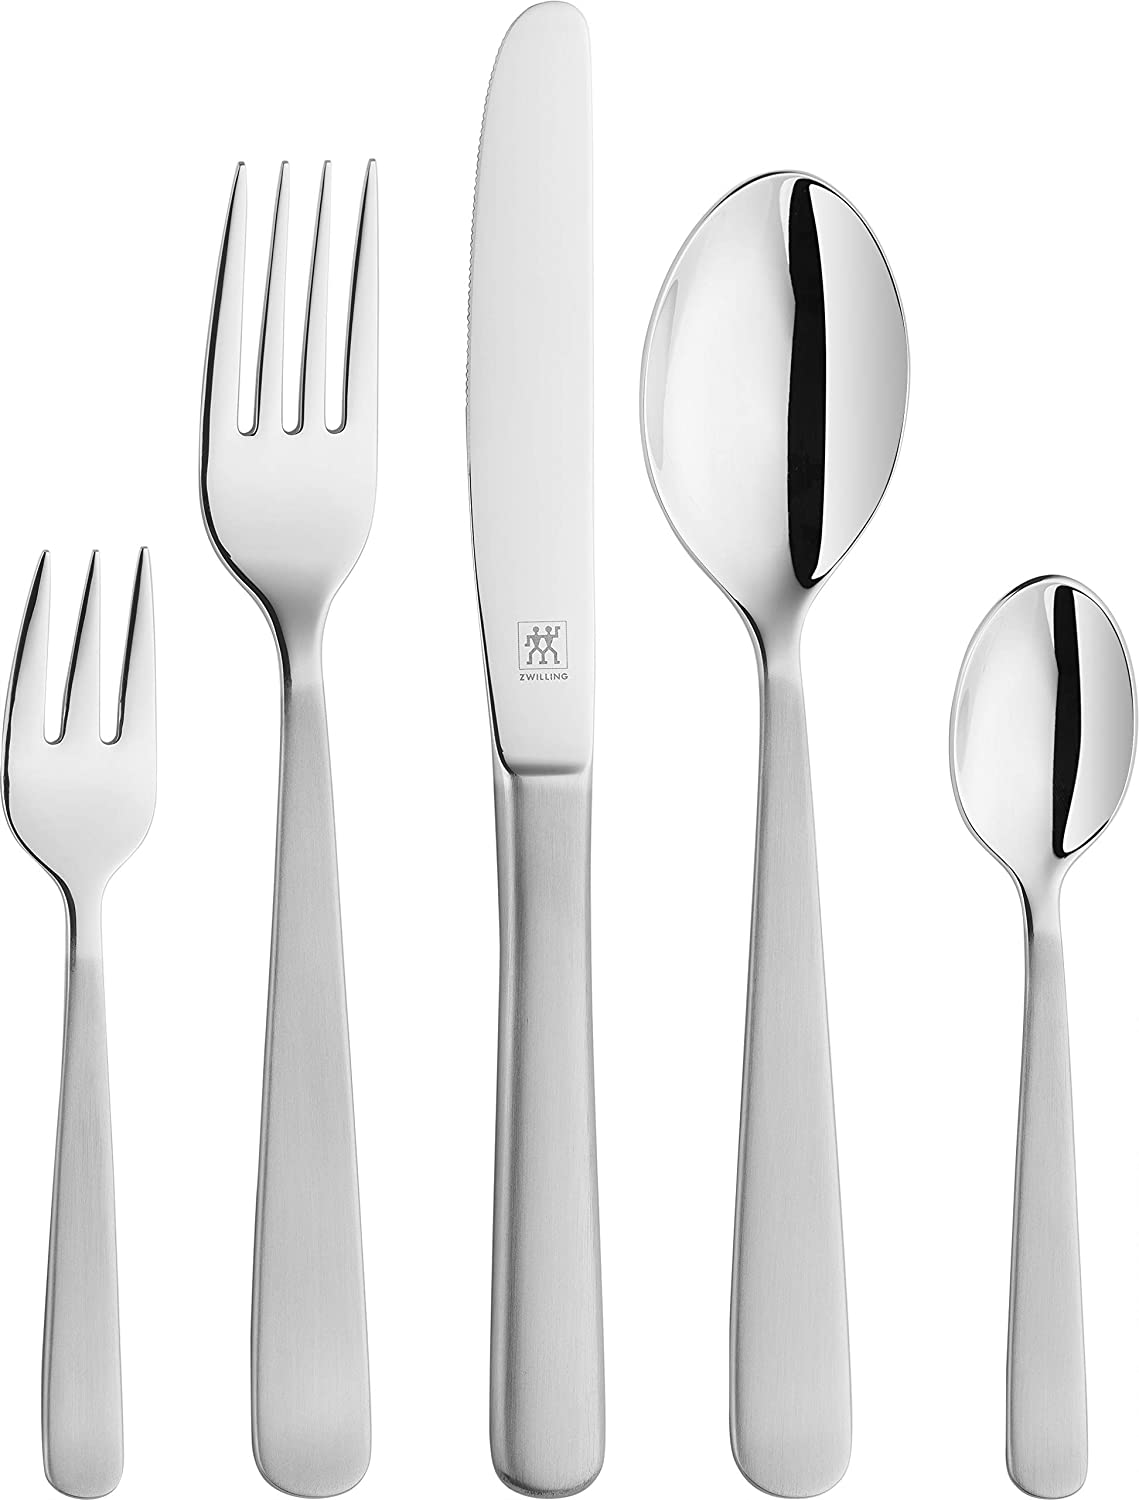 Zwilling 02790-630-0 Trend cutlery set, 30 pieces, for 6 people, matt, 18/10 stainless steel